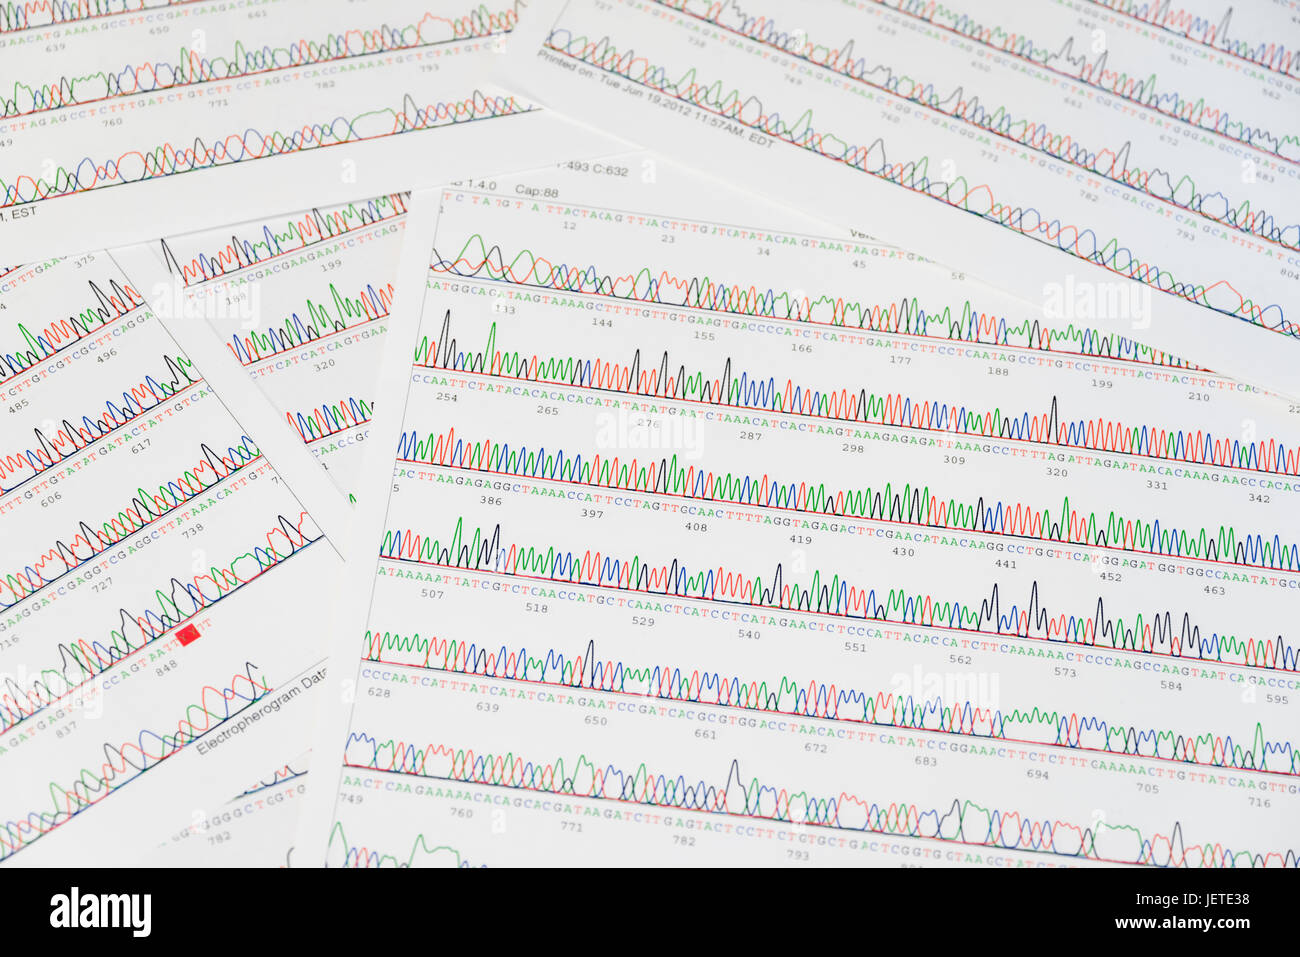 Sanger sequencing result sheet Stock Photo